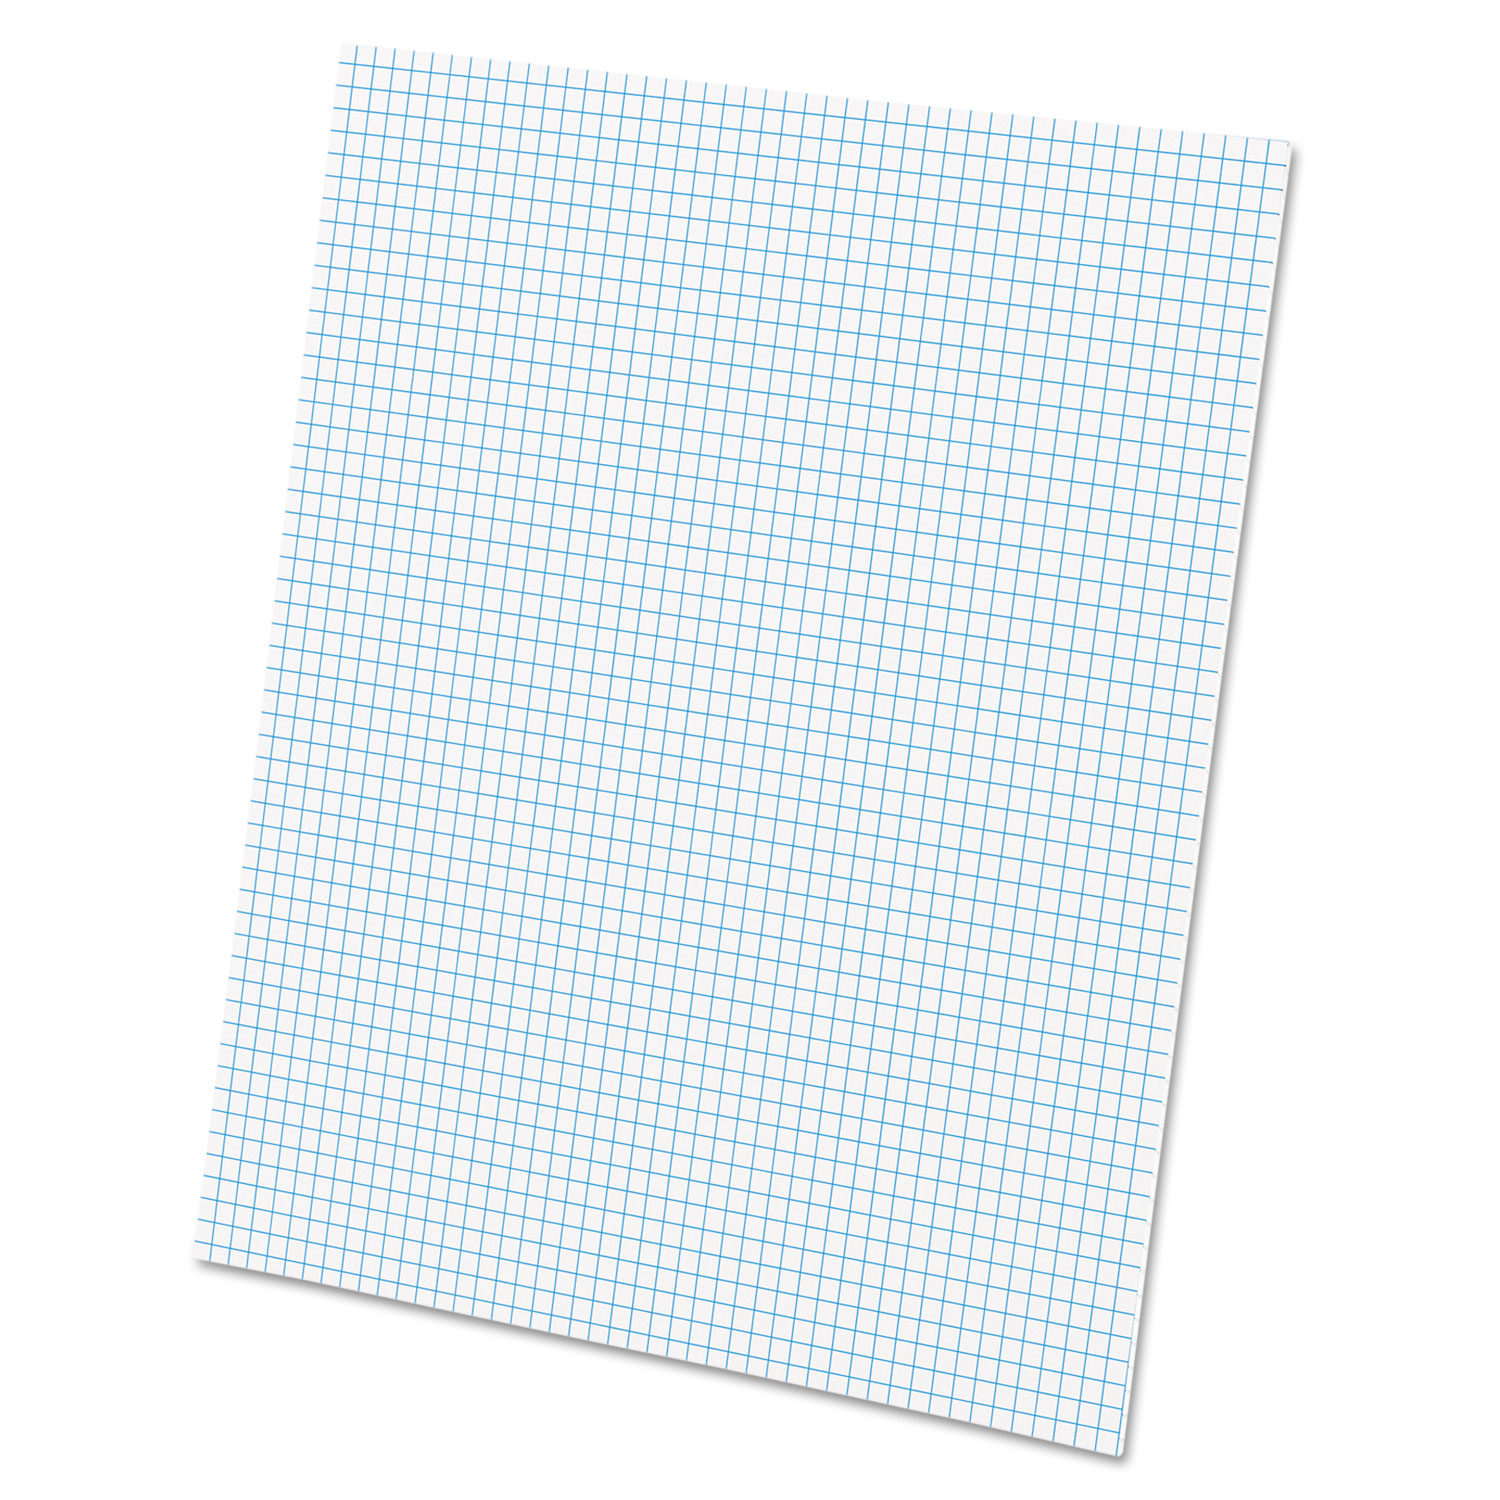  Ampad 22-002 Quadrille Pads, 5 sq/in Quadrille Rule, 8.5 x 11, White, 50 Sheets (TOP22002) 